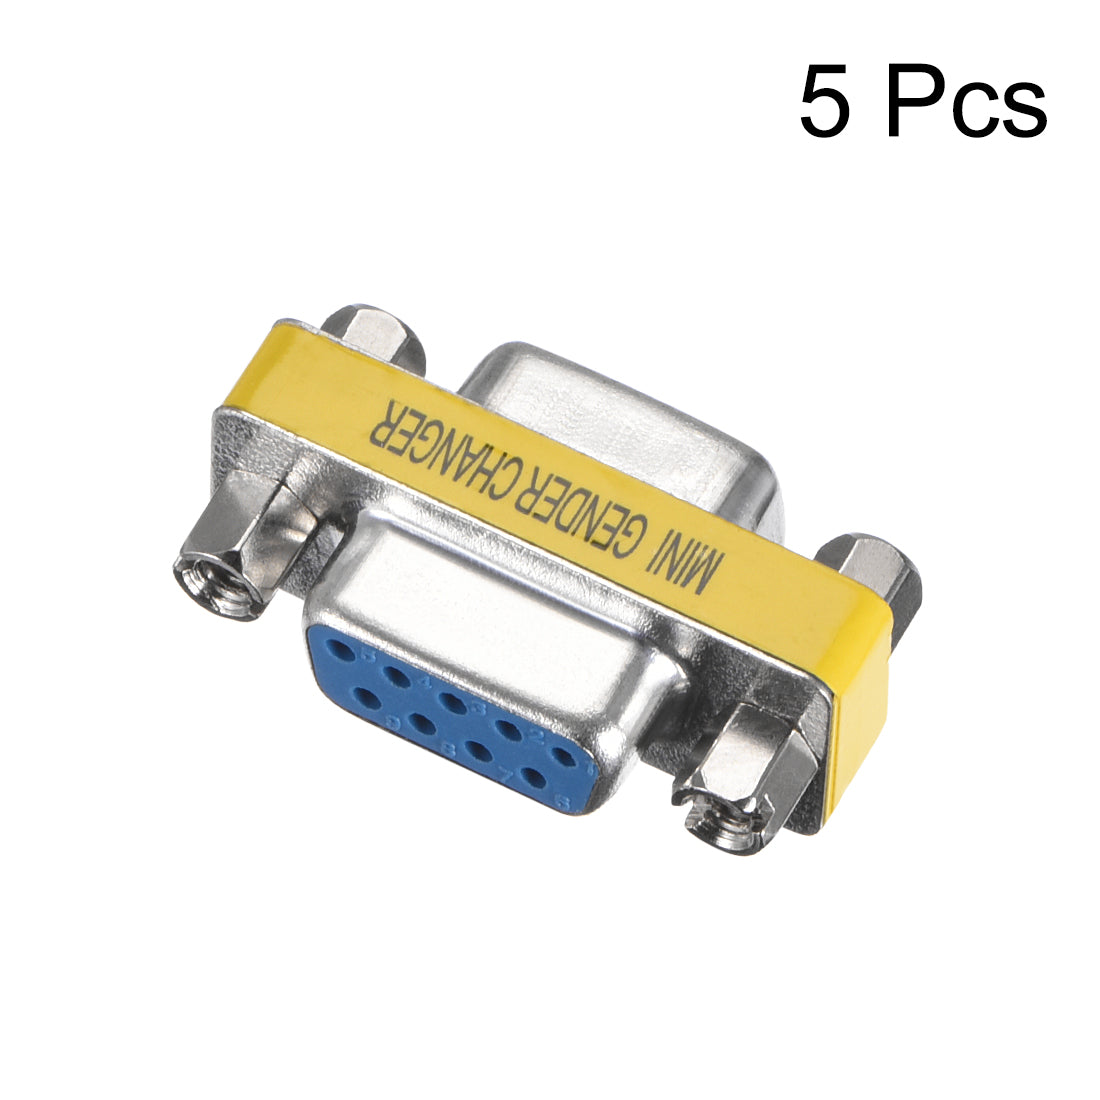 uxcell Uxcell DB9 VGA Gender Changer 9 Pin Female to Female 2-row Mini Gender Changer Coupler Adapter Connector for Serial Applications Blue 5pcs